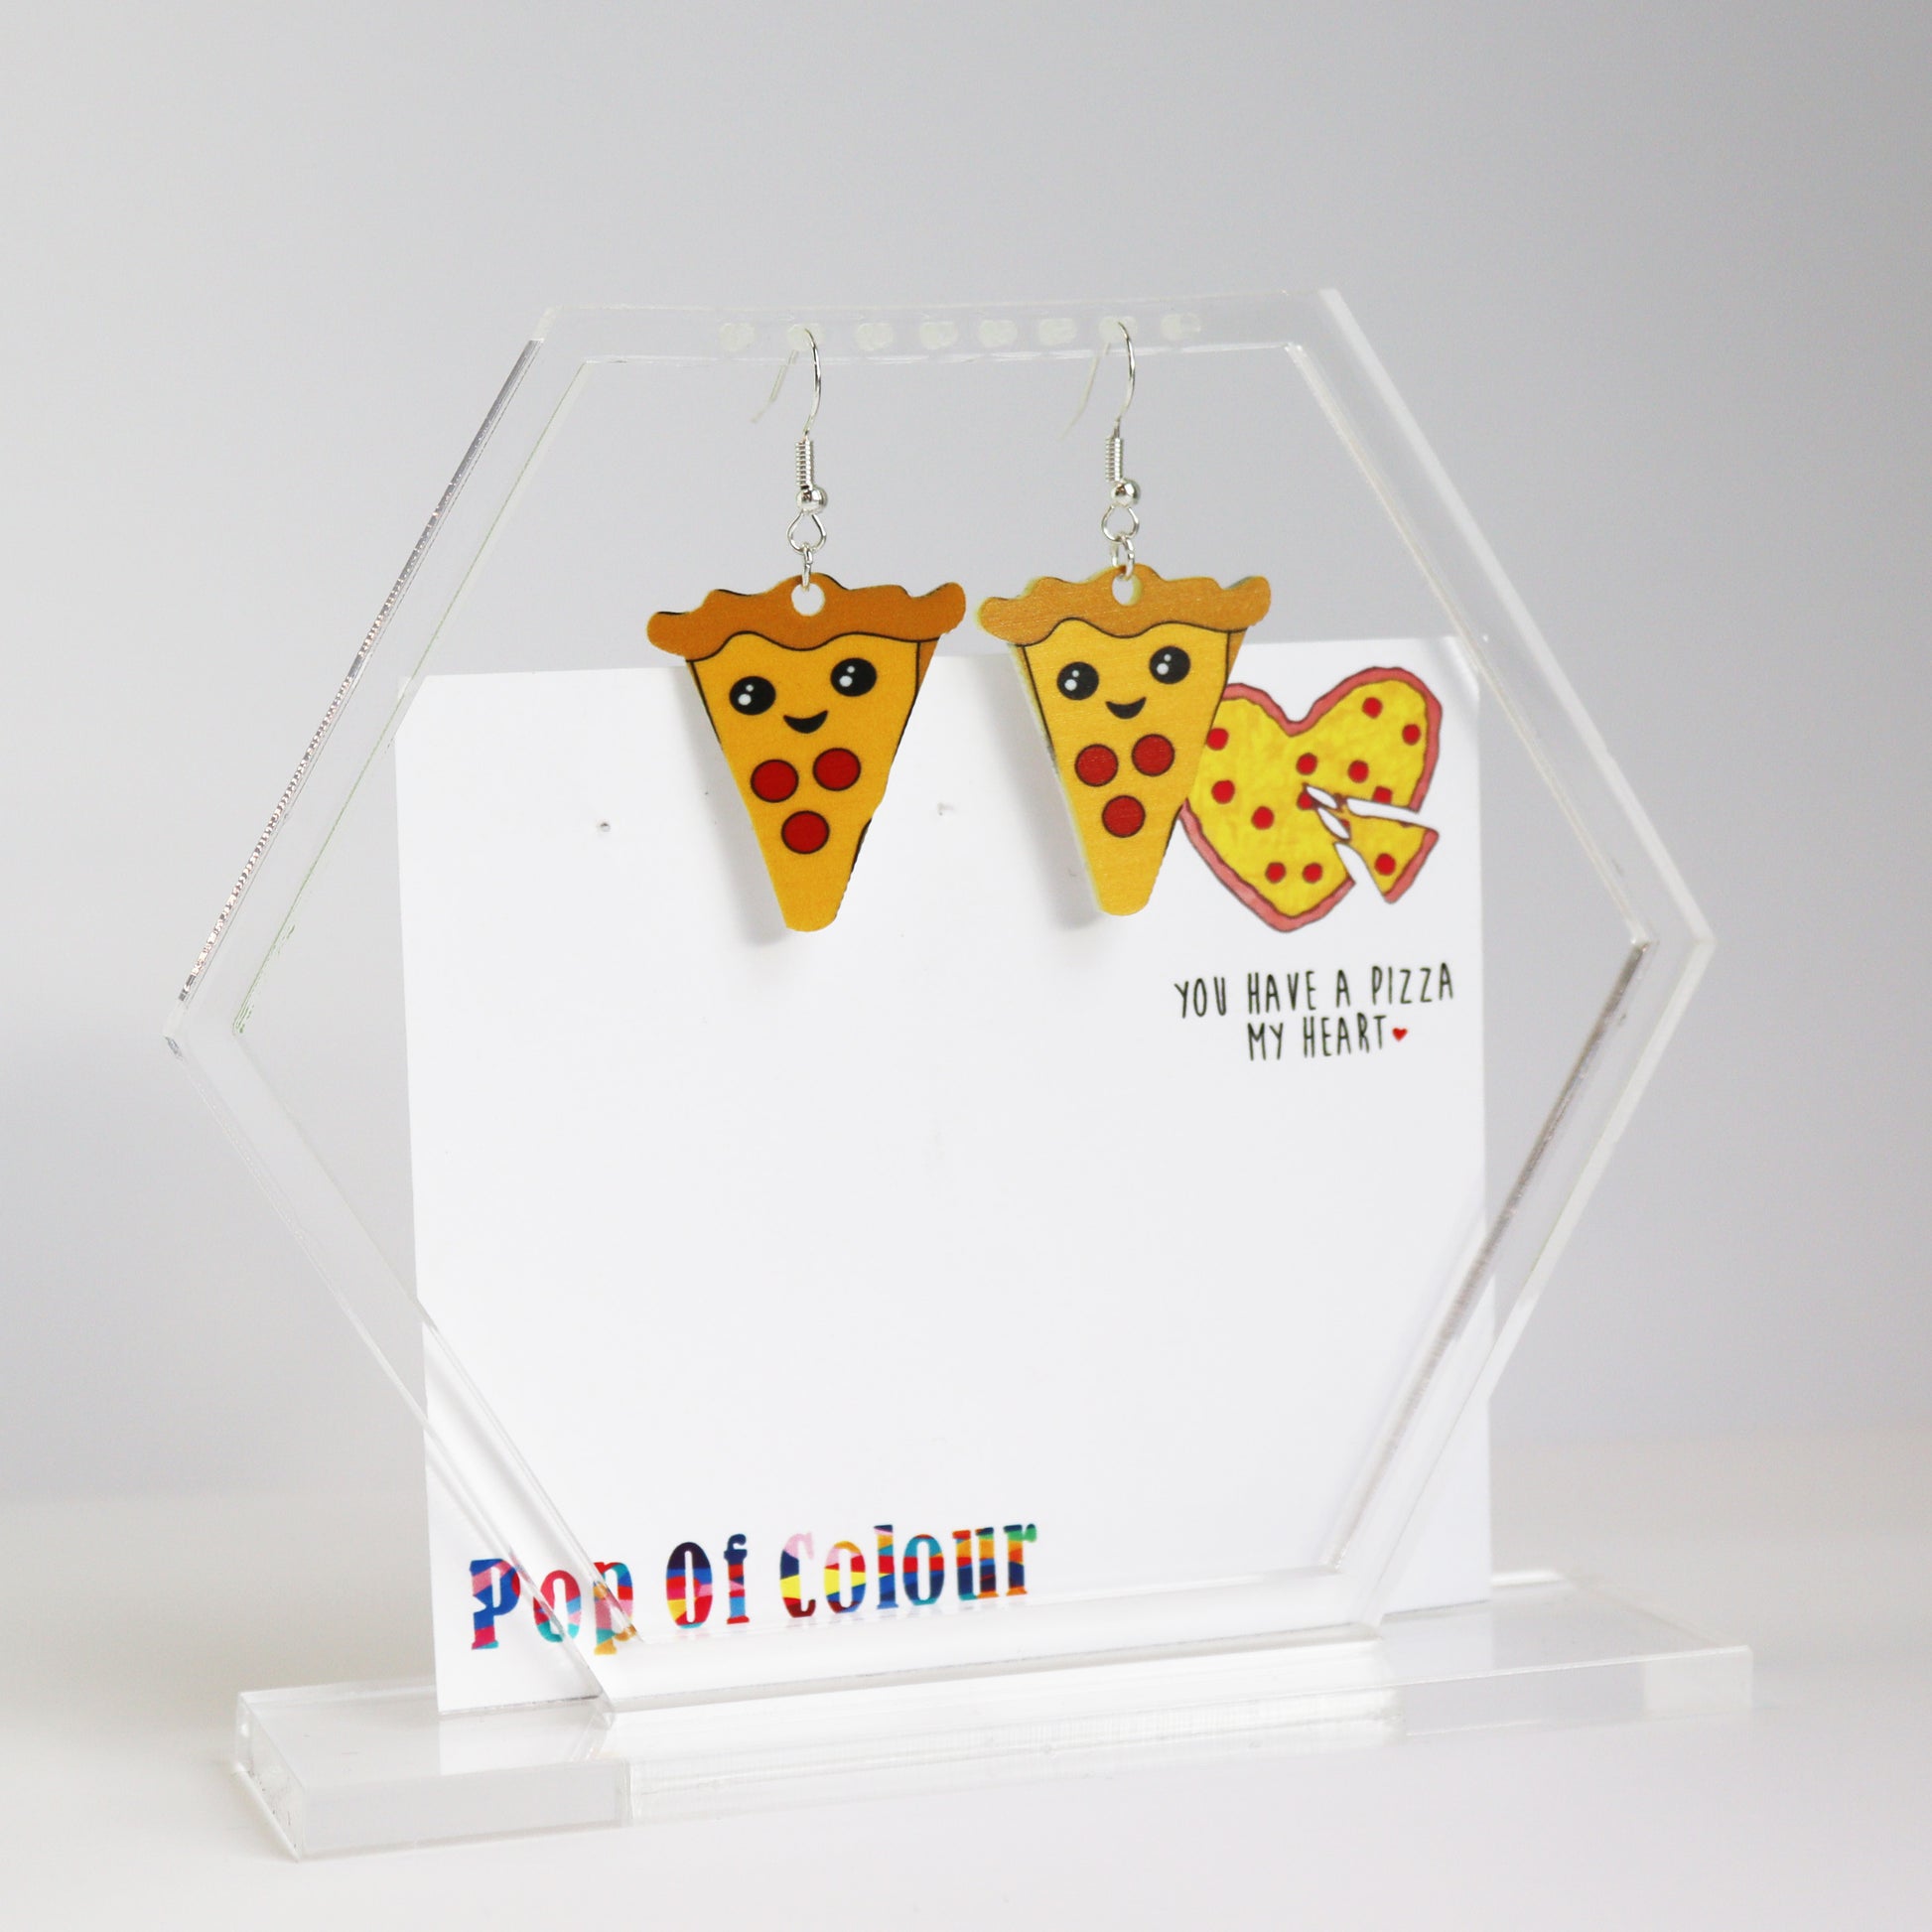 you have a pizza my heart earrings acrylic printed heart earrings shown in hanging acrylic earring holder